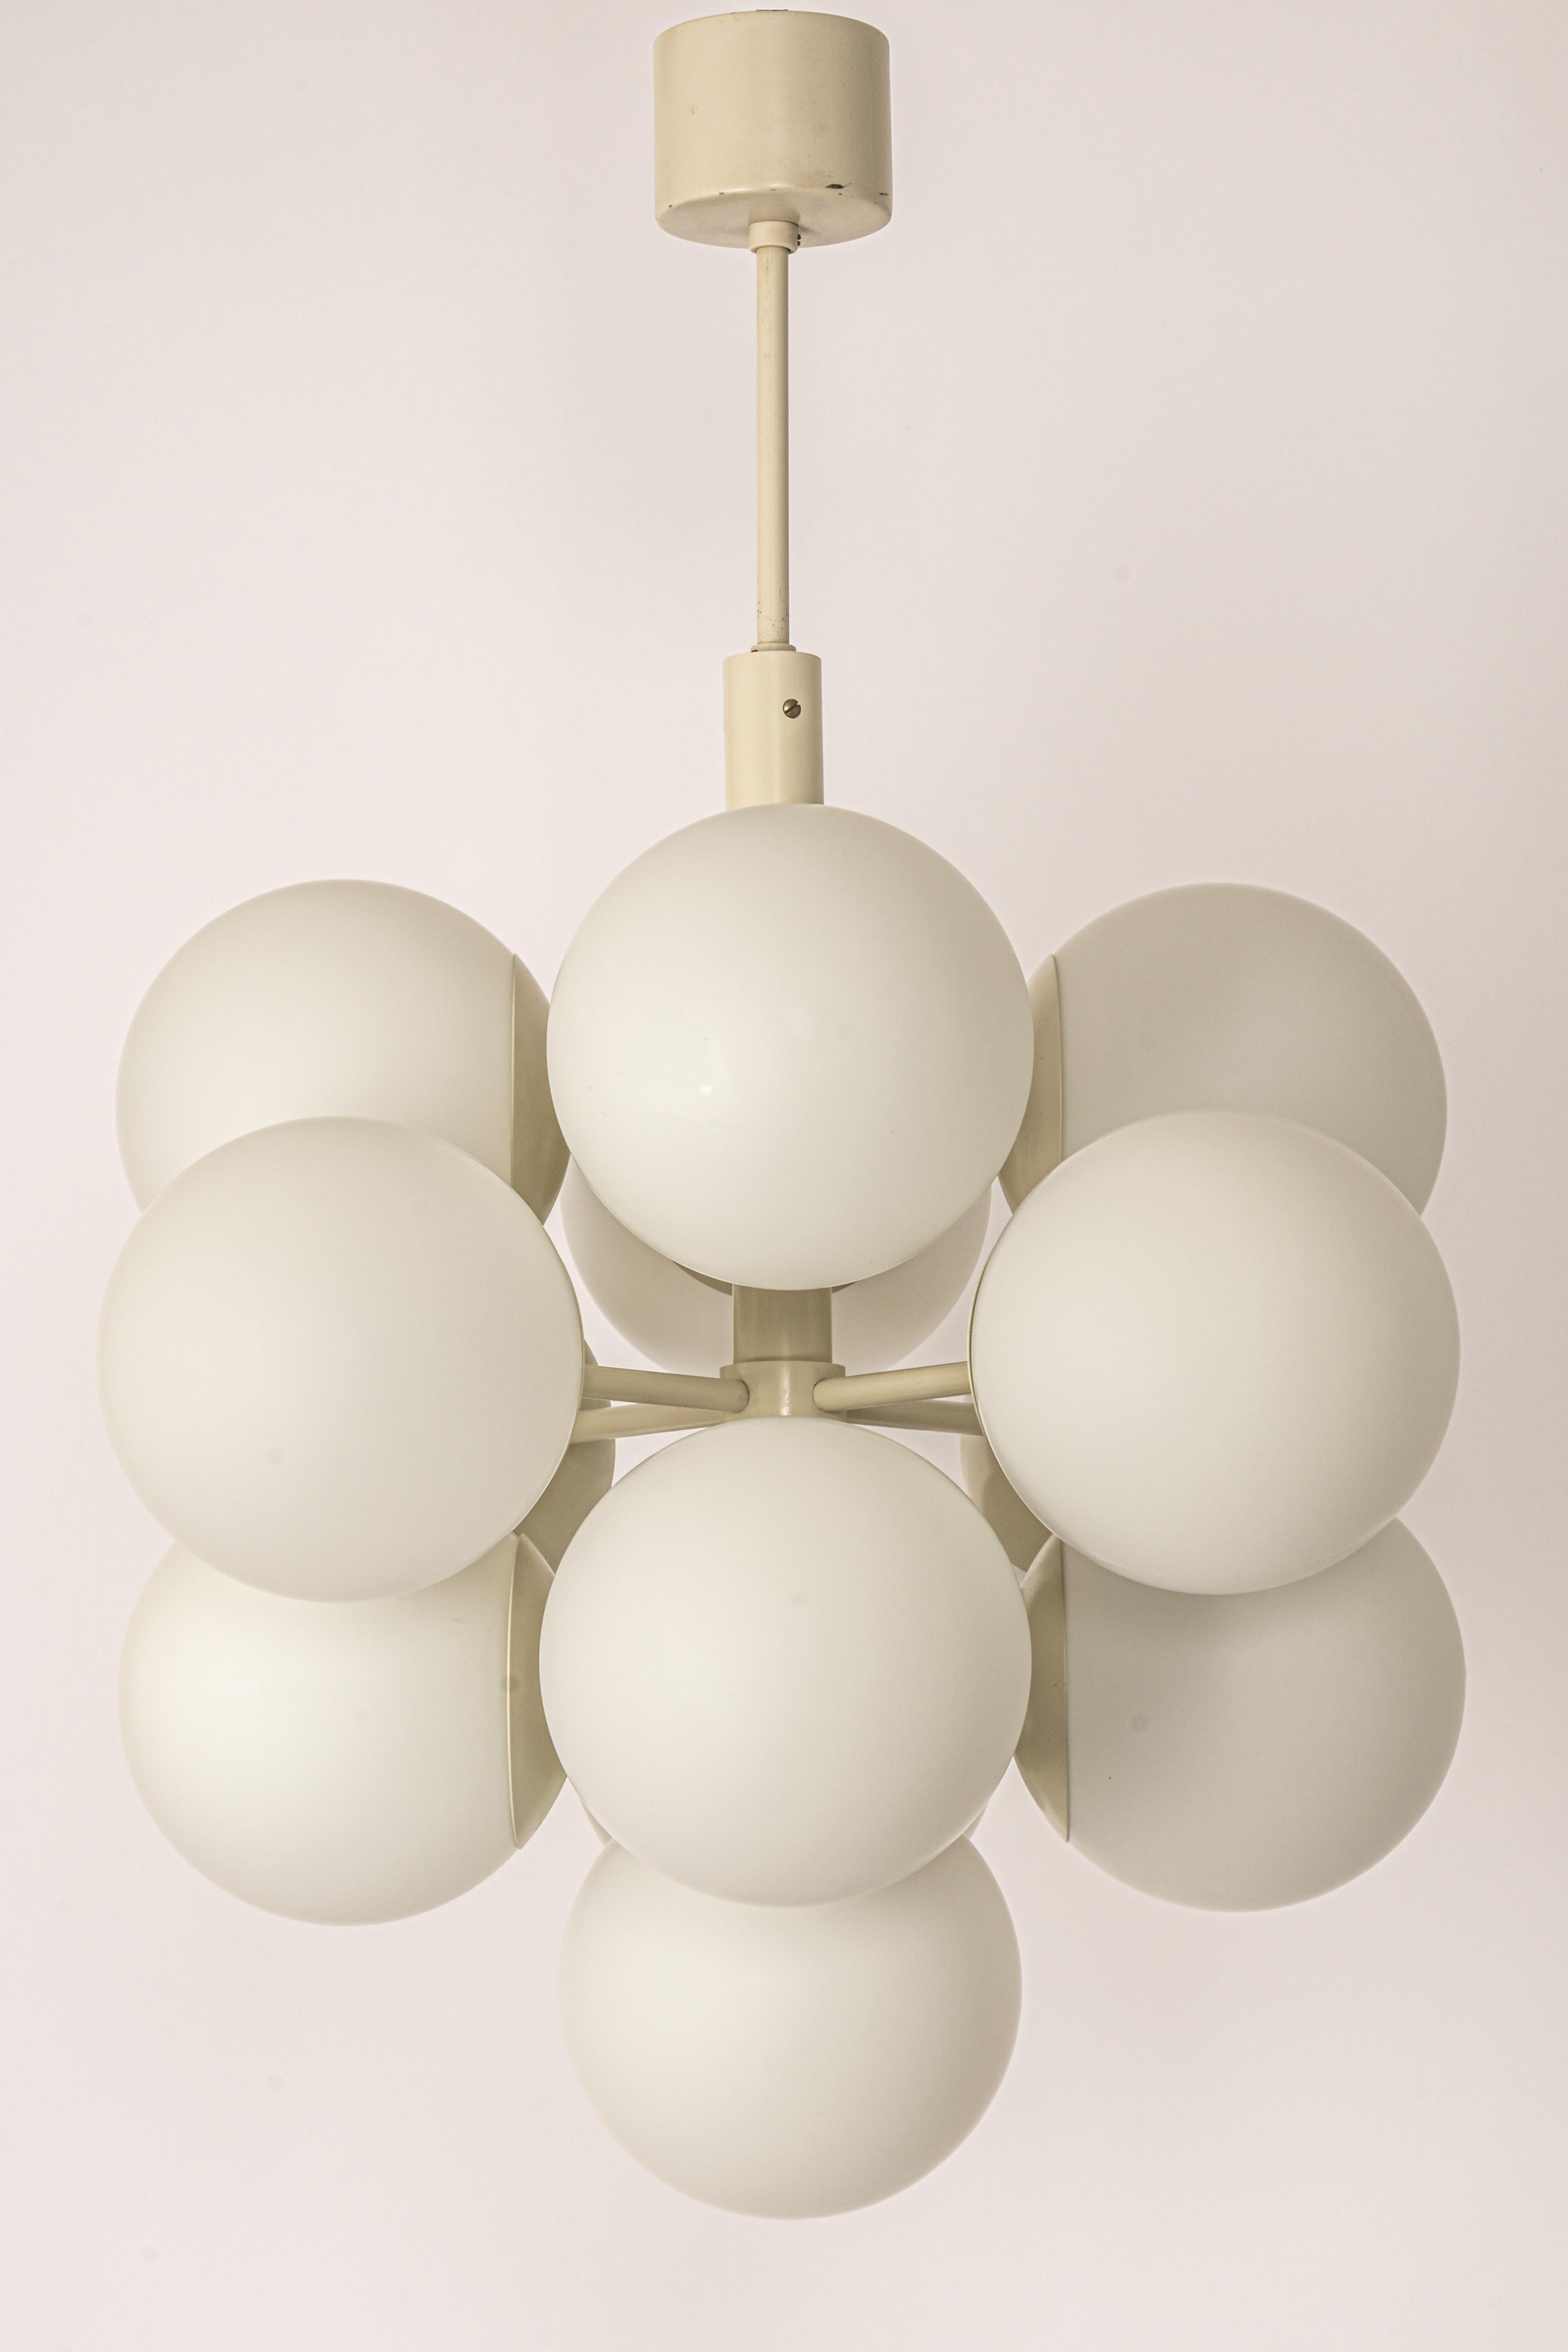 Stunning Sputnik chandelier with 13 handmade glass globes by Kaiser Leuchten, Germany, 1960s.

High quality and in very good condition. Cleaned, well-wired and ready to use. 

The fixture requires 13 x E14 small bulbs with 40W max each and